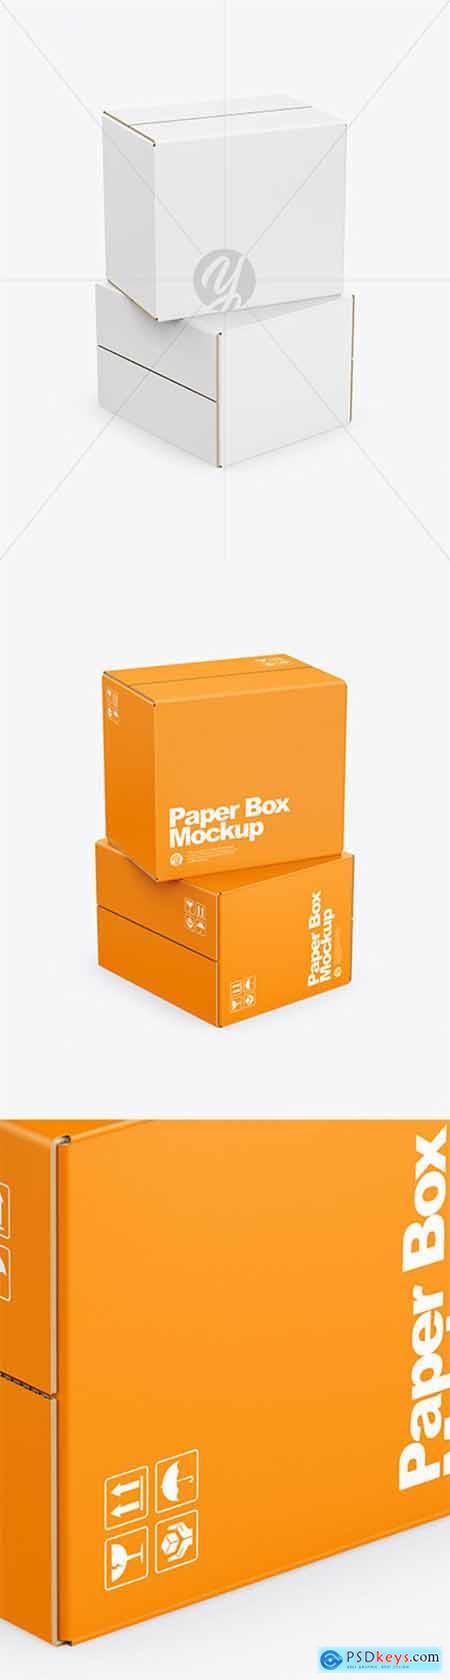 Two Paper Boxes Mockup 42957